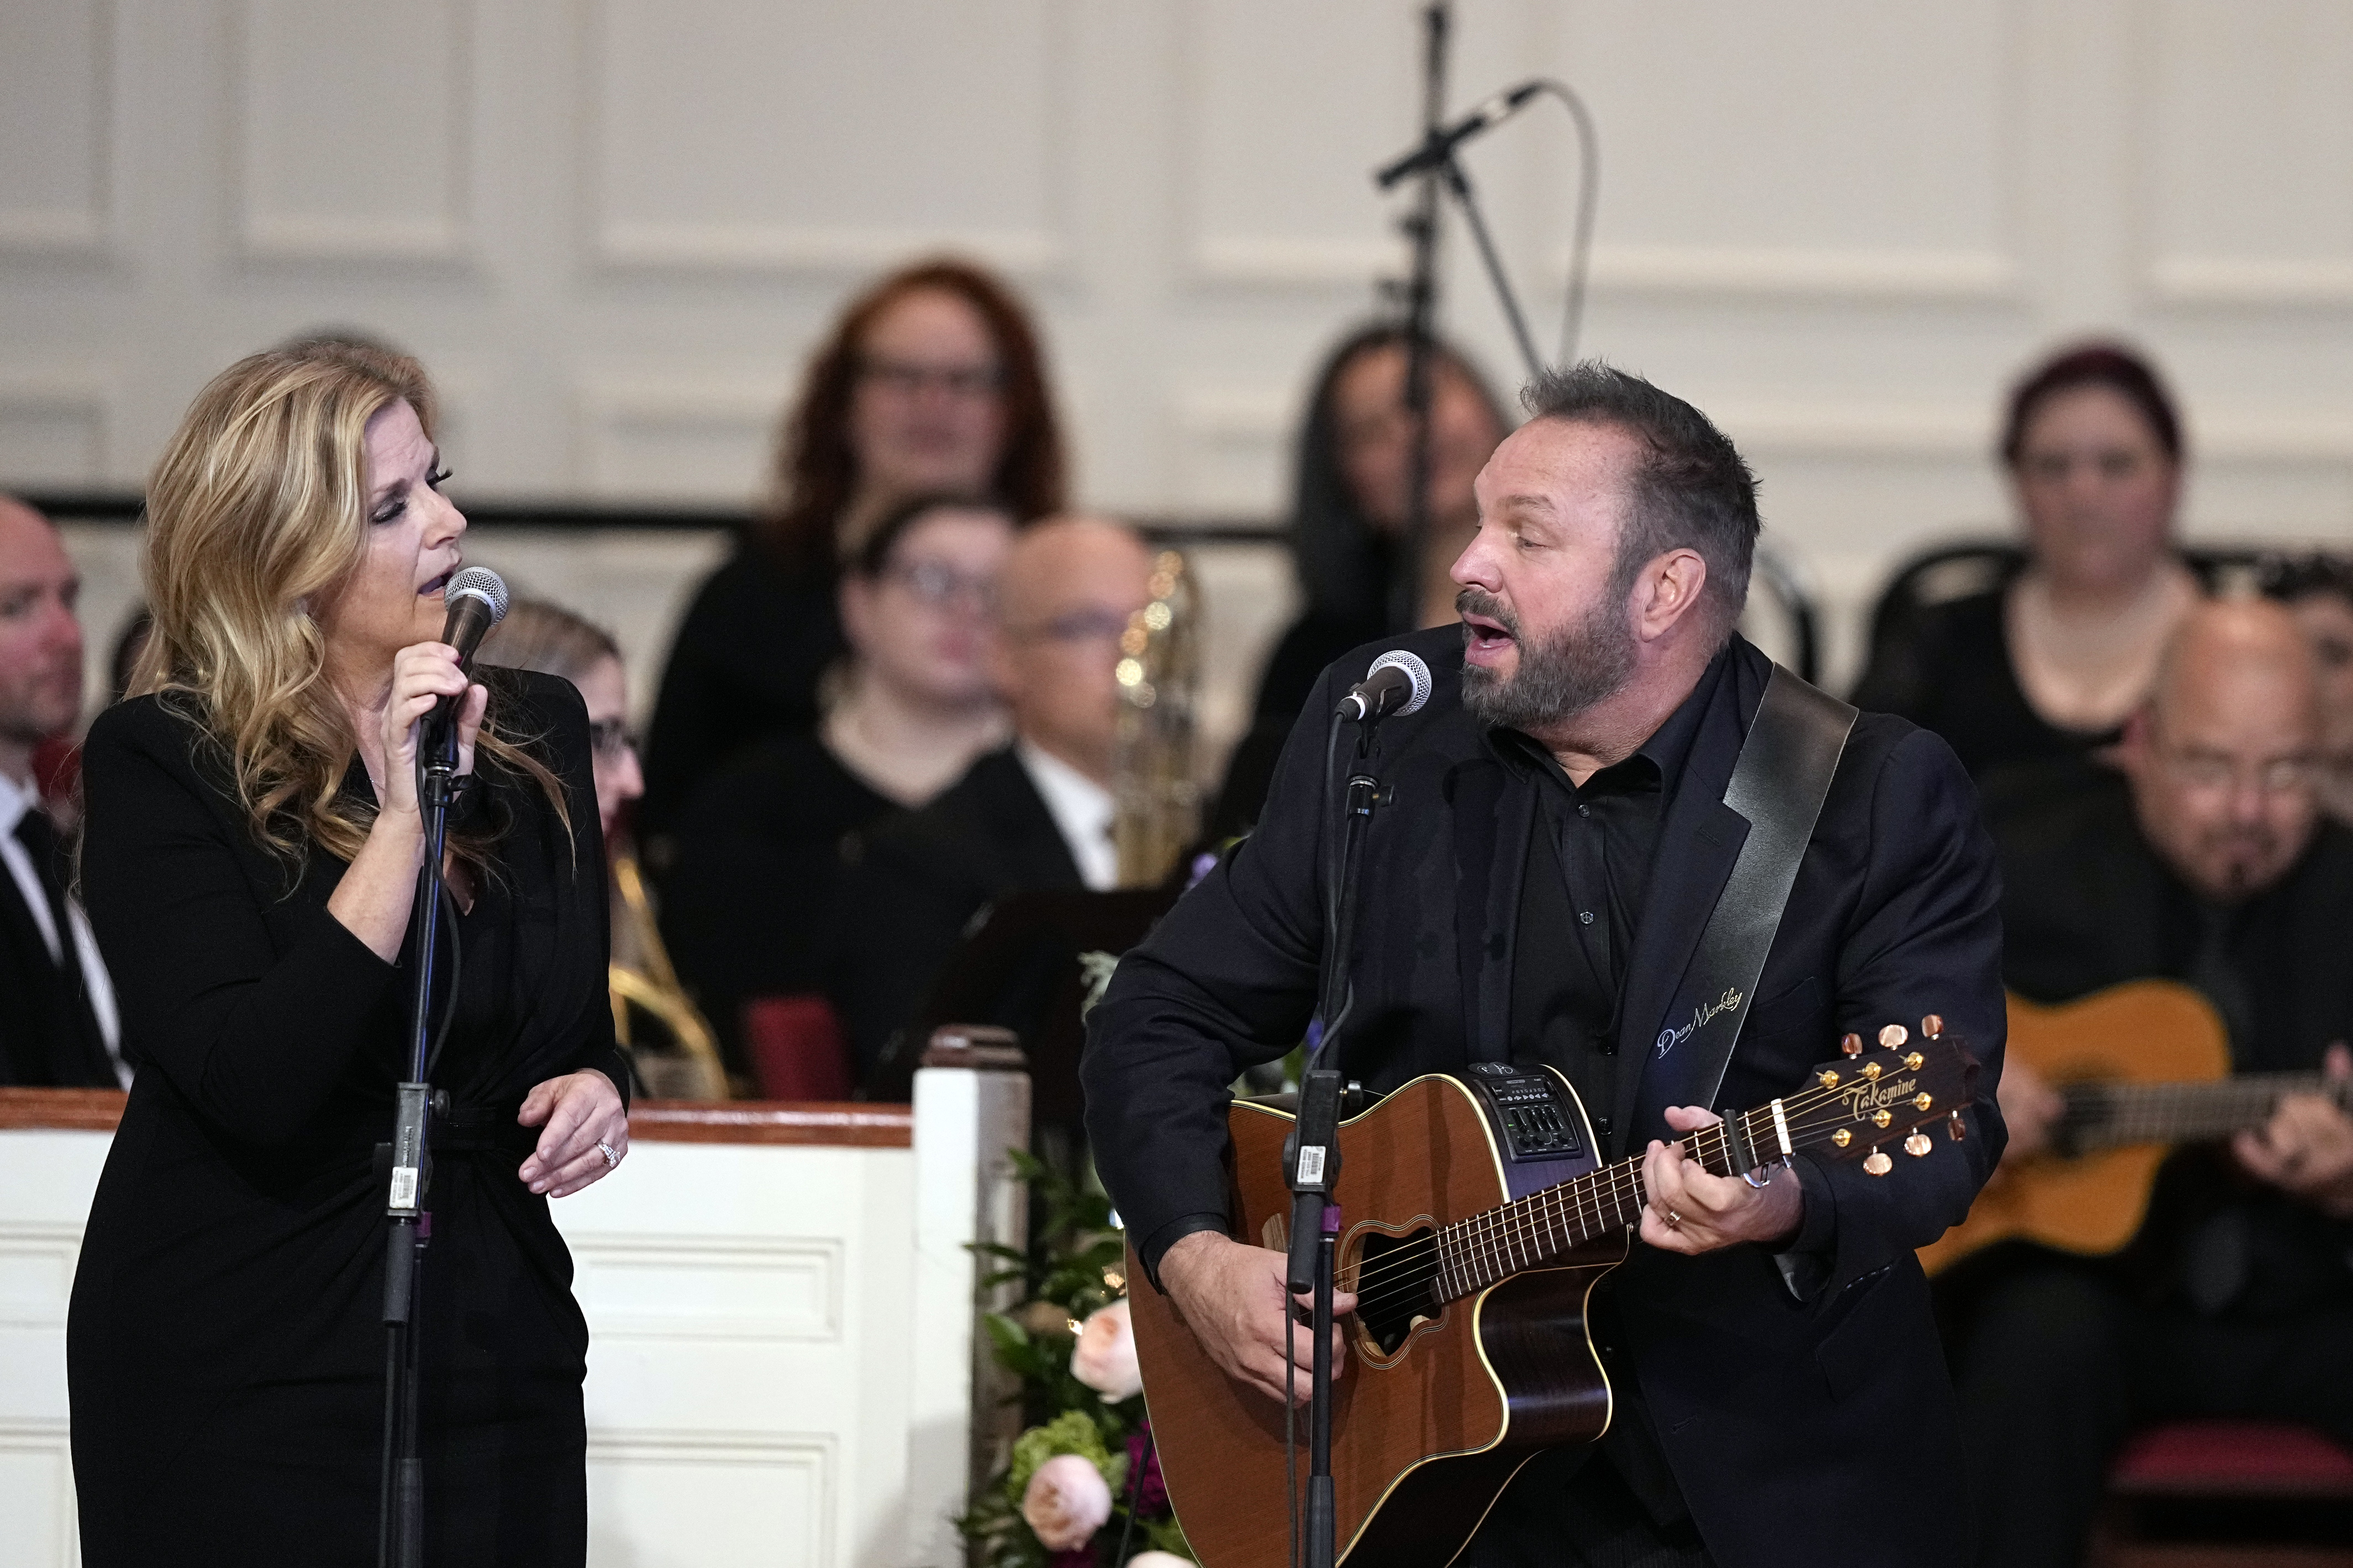 ATLANTA, GEORGIA - NOVEMBER 28: Trisha Yearwood and Garth Brooks perform "Imagine" at a tribute service for former first lady Rosalynn Carter at Glenn Memorial United Methodist Church at Emory University on November 28, 2023 in Atlanta, Georgia. Rosalynn Carter, who passed away on November 19 at the age of 96, was married to former U.S. President Jimmy Carter for 77 years. In her lifetime she was an activist and writer known to be an advocate for the elderly, affordable housing, mental health, and the protection of monarch butterflies. President Joe Biden, former President Jimmy Carter and every living first lady are attending the service.